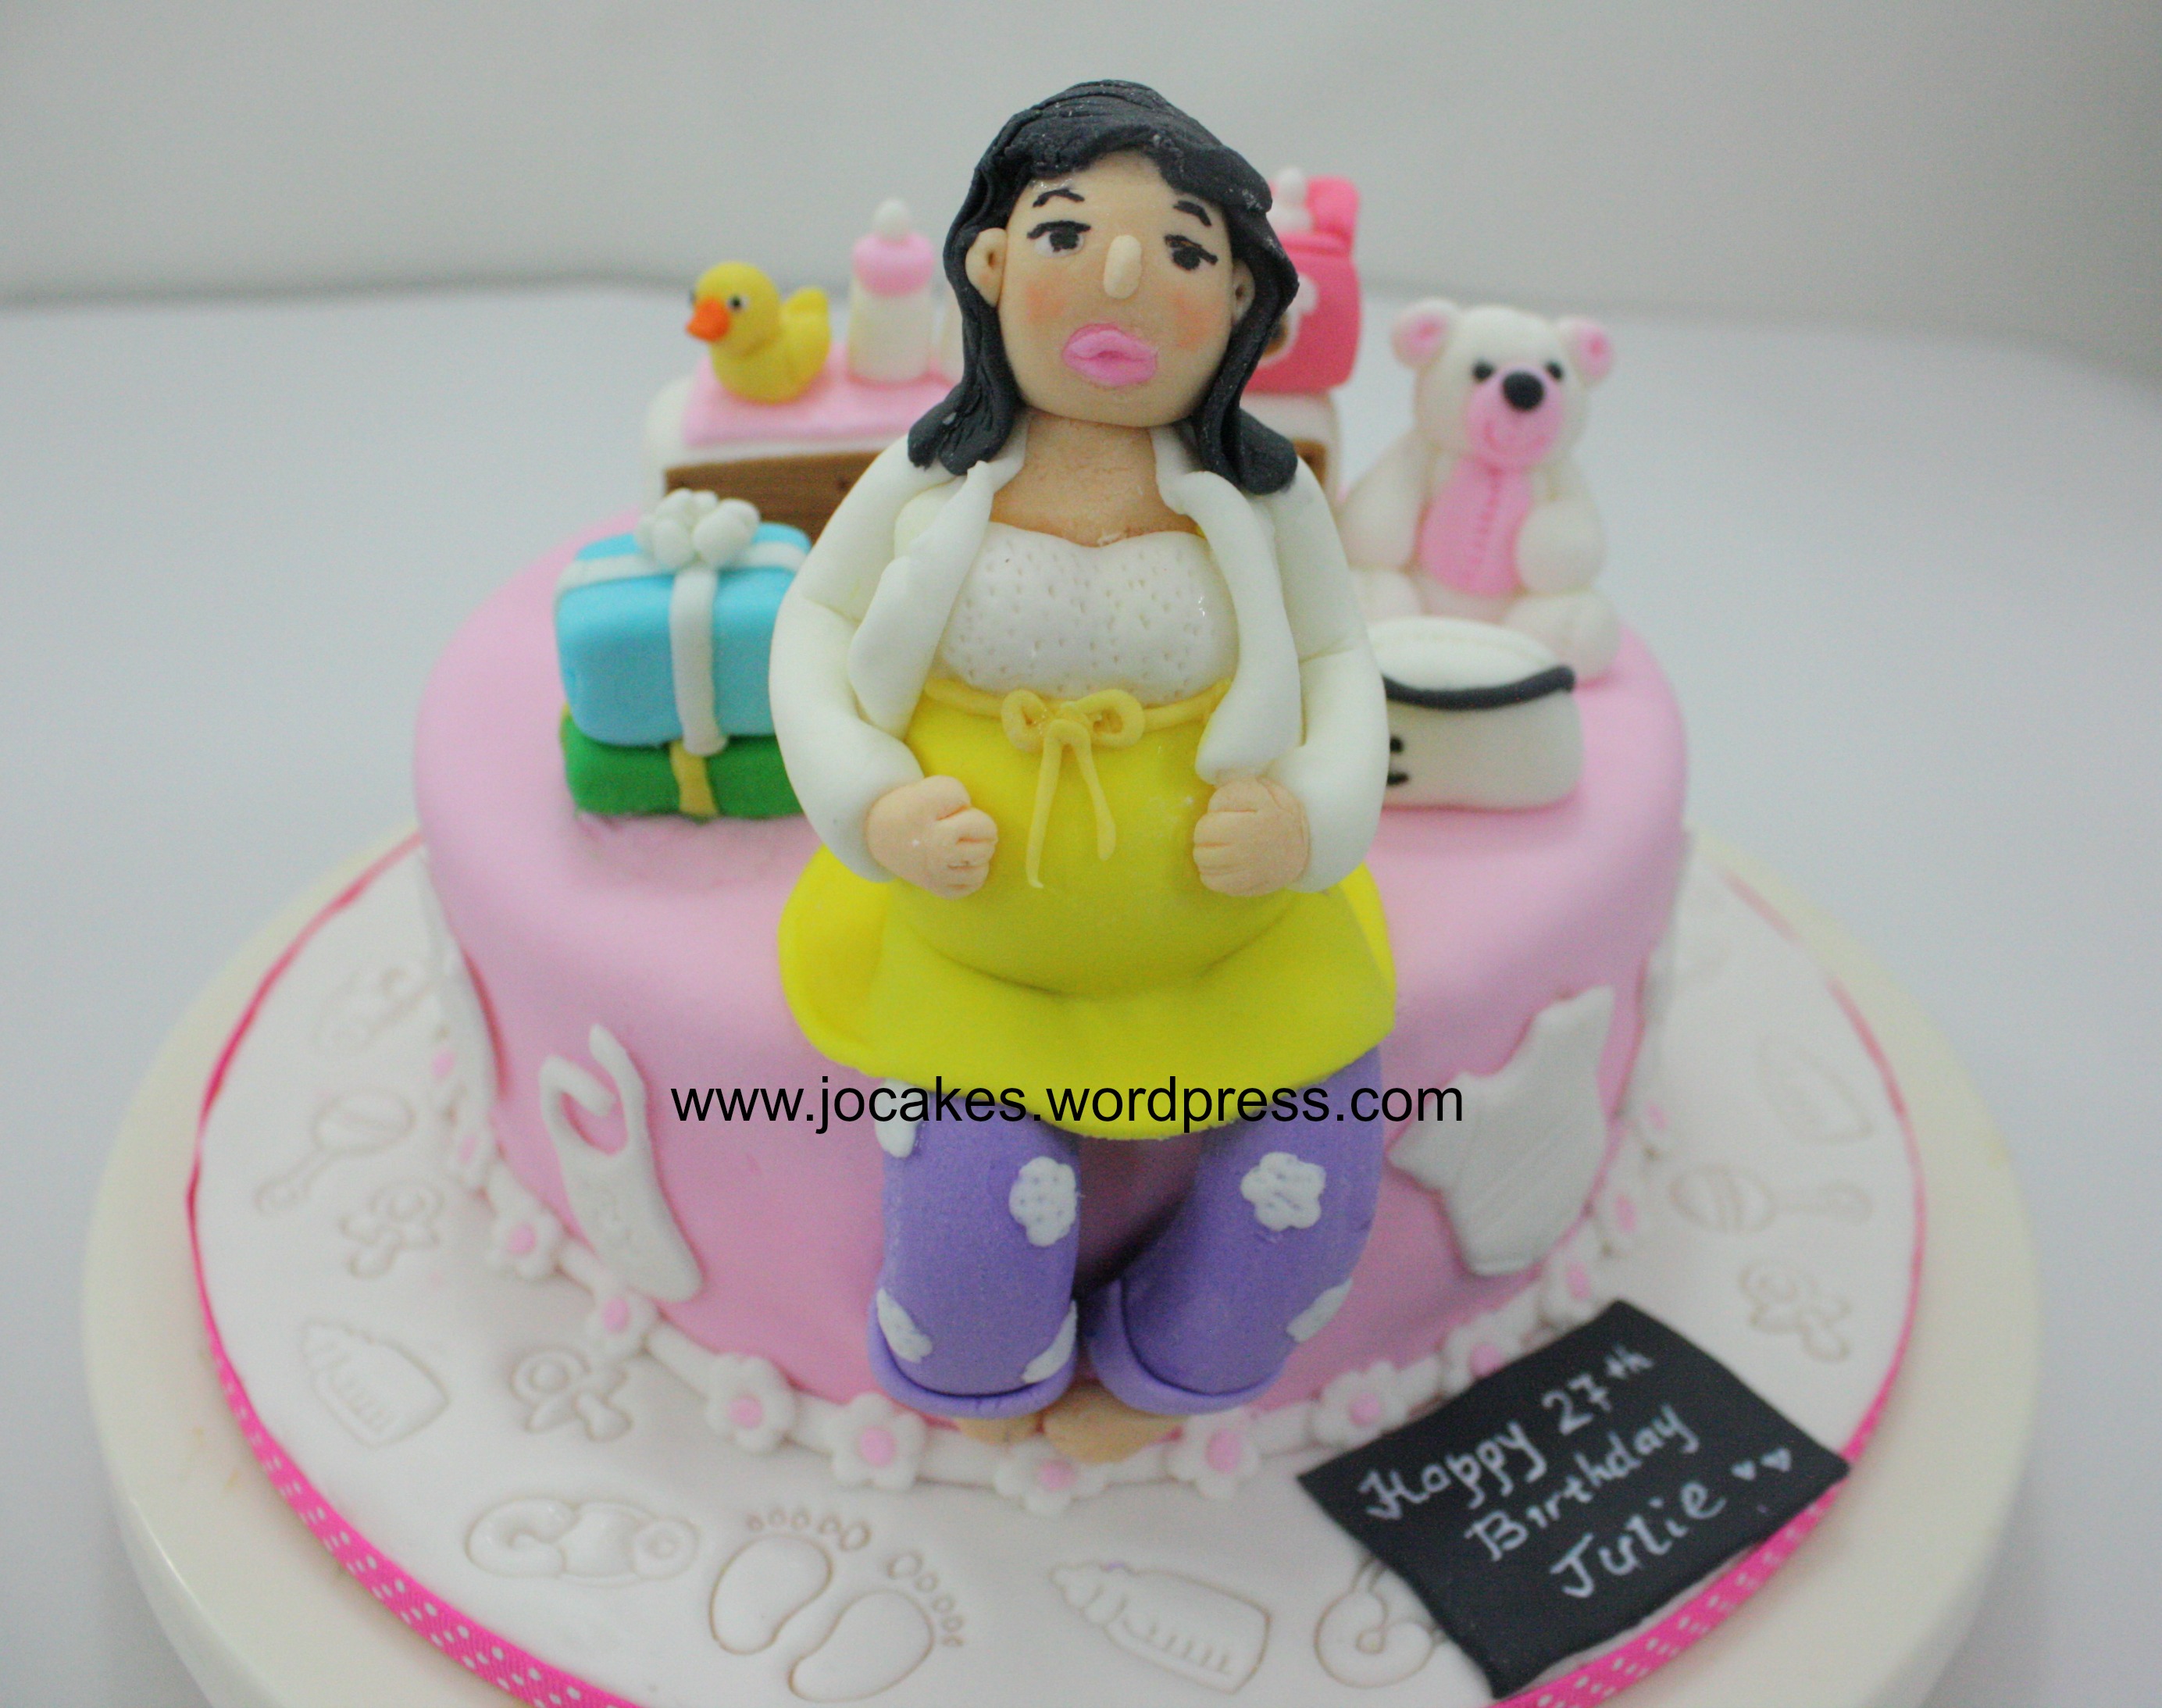 Top 5 Cake Design Ideas You Must Try For Baby Shower